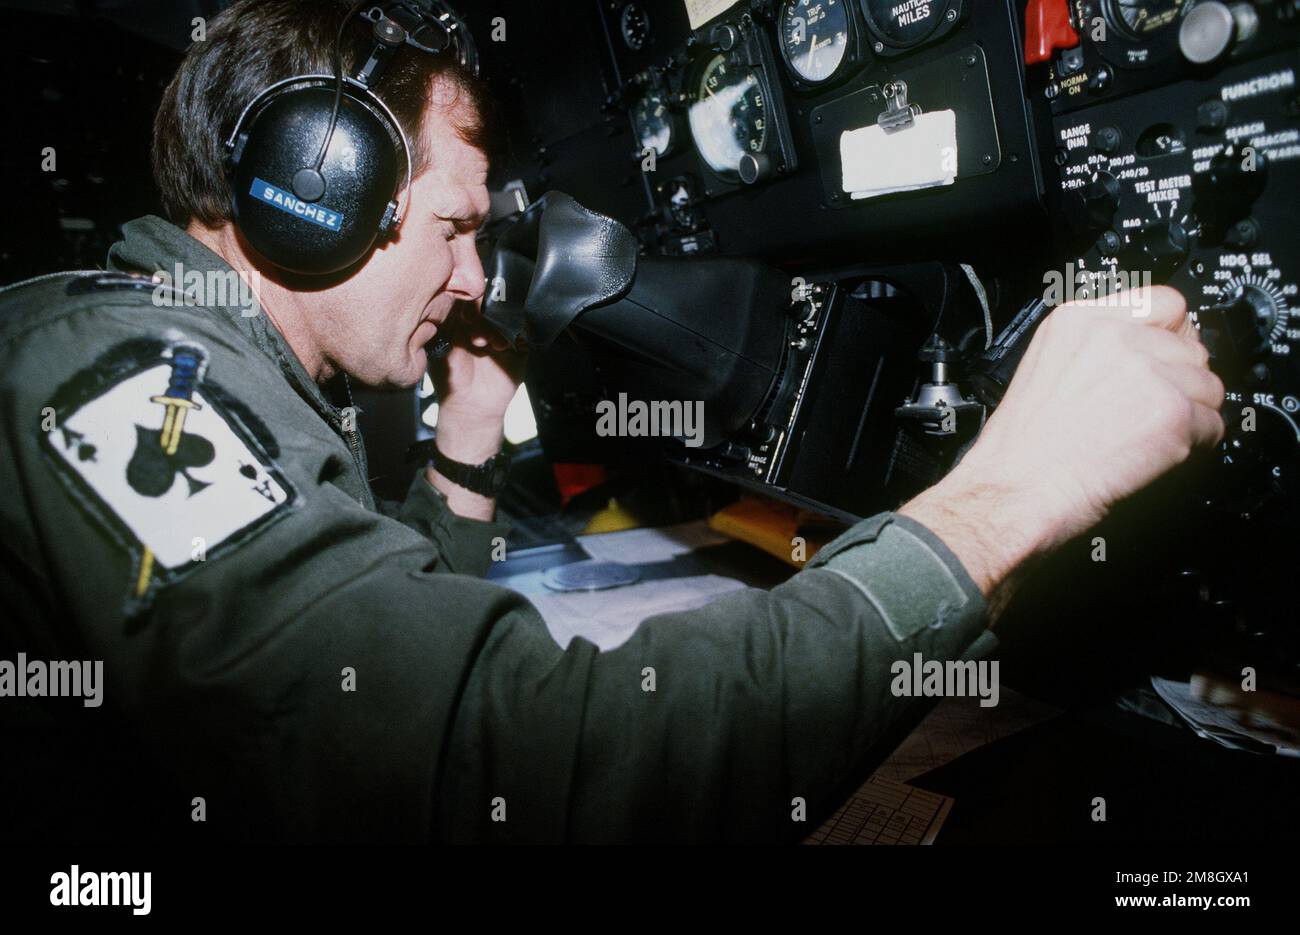 MAJ. Terry Sanchez, KC-135 navigator with the 434th Air Refueling Wing, AFRES, Grissom AFB, Indiana, guides his crew on an air refueling mission in support of the operation. Subject Operation/Series: RESTORE HOPE Base: Moron Country: Spain (ESP) Stock Photo